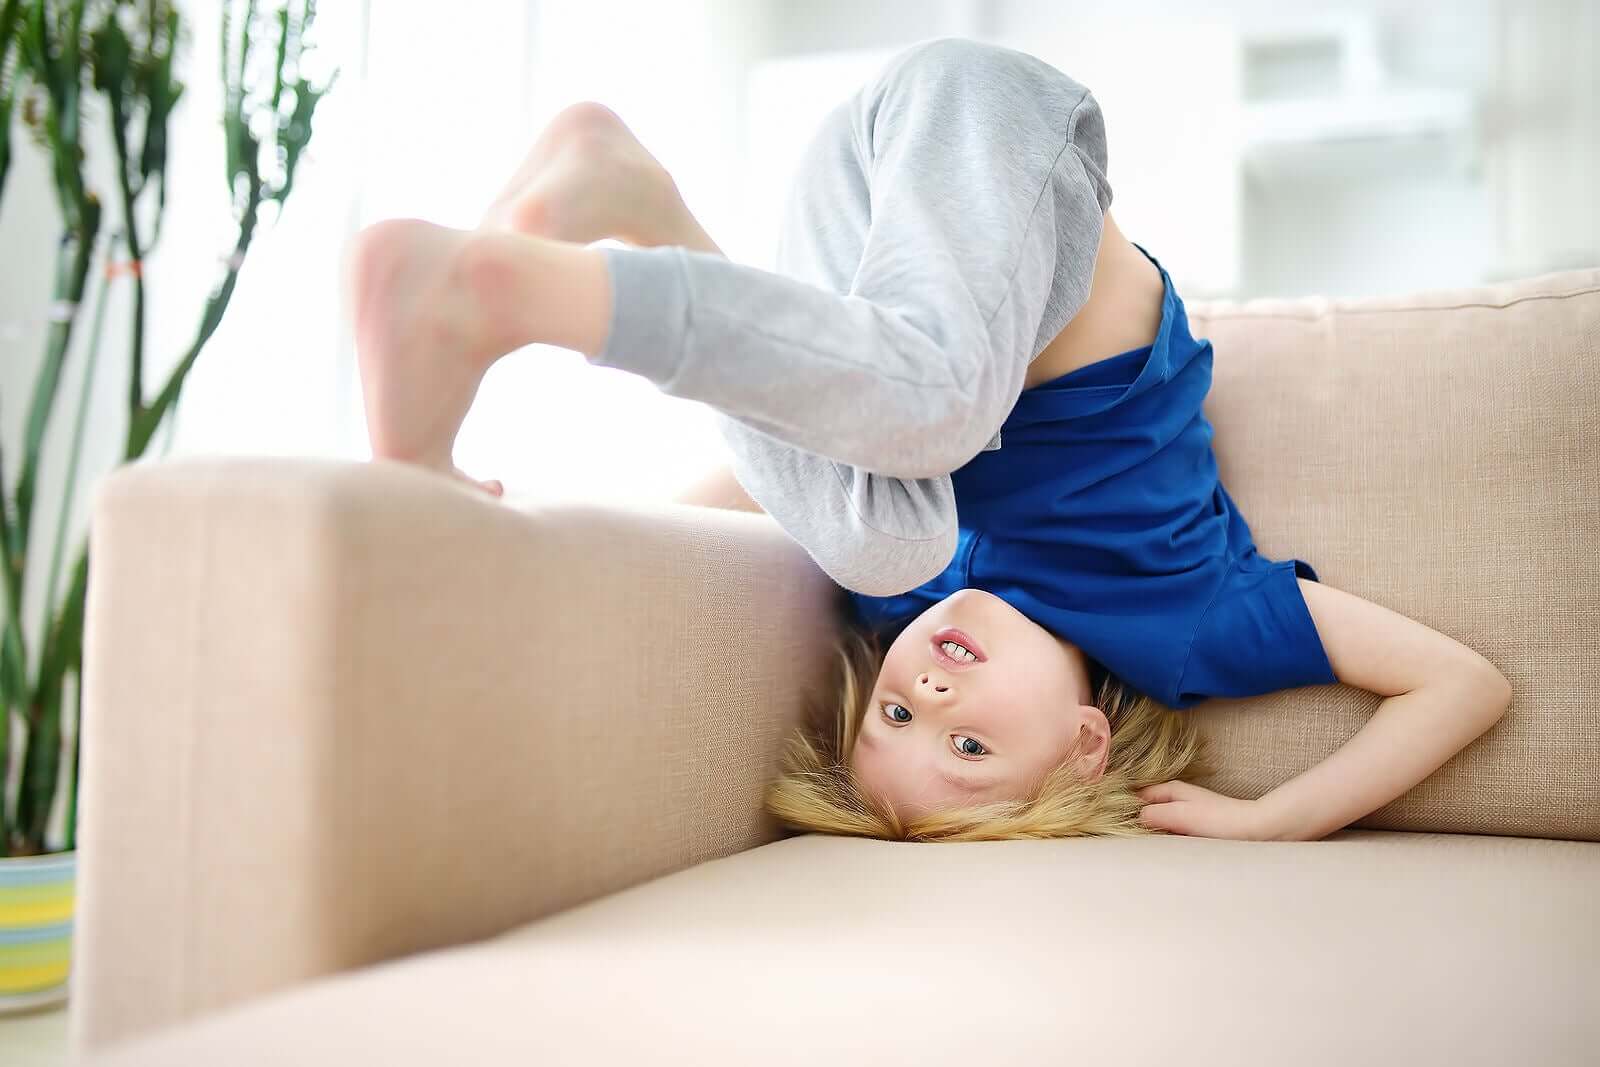 A child tumbling on a couch.